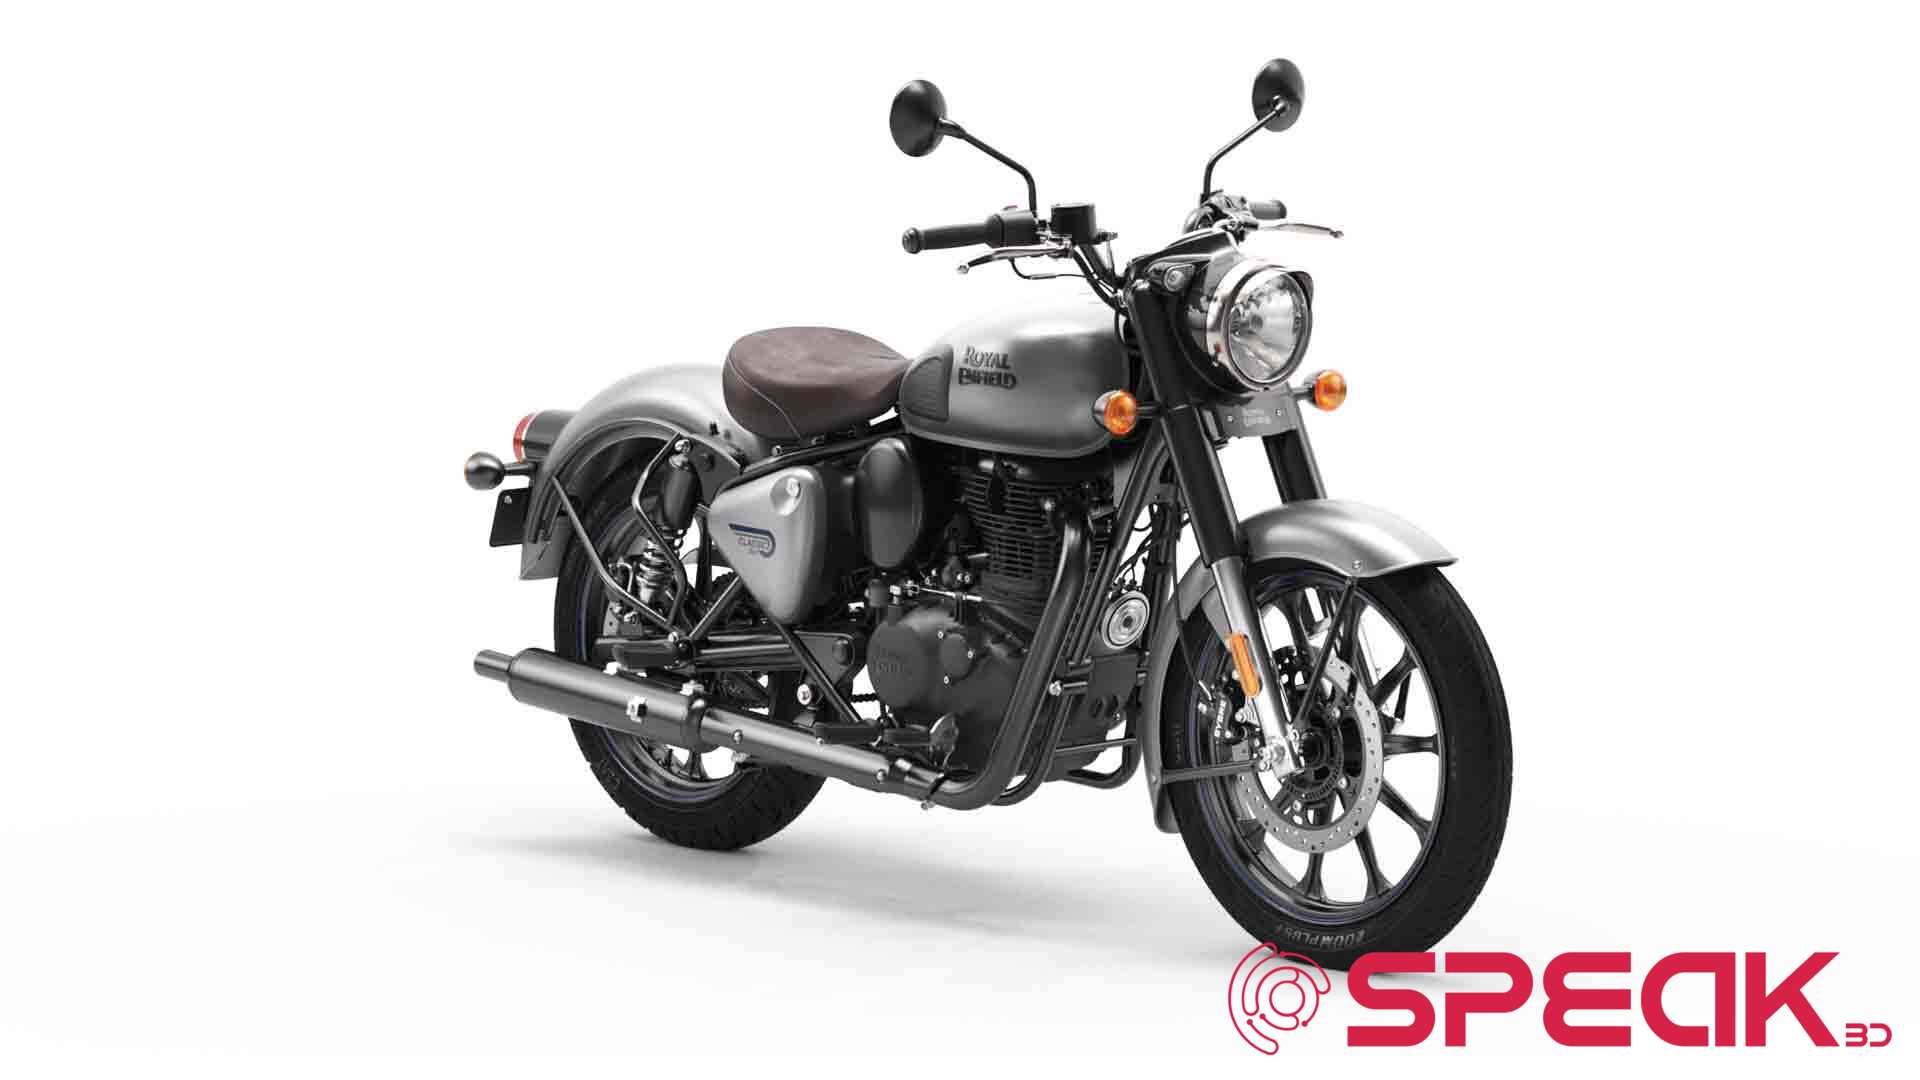 Royal Enfield Roadster 650 - Pictures